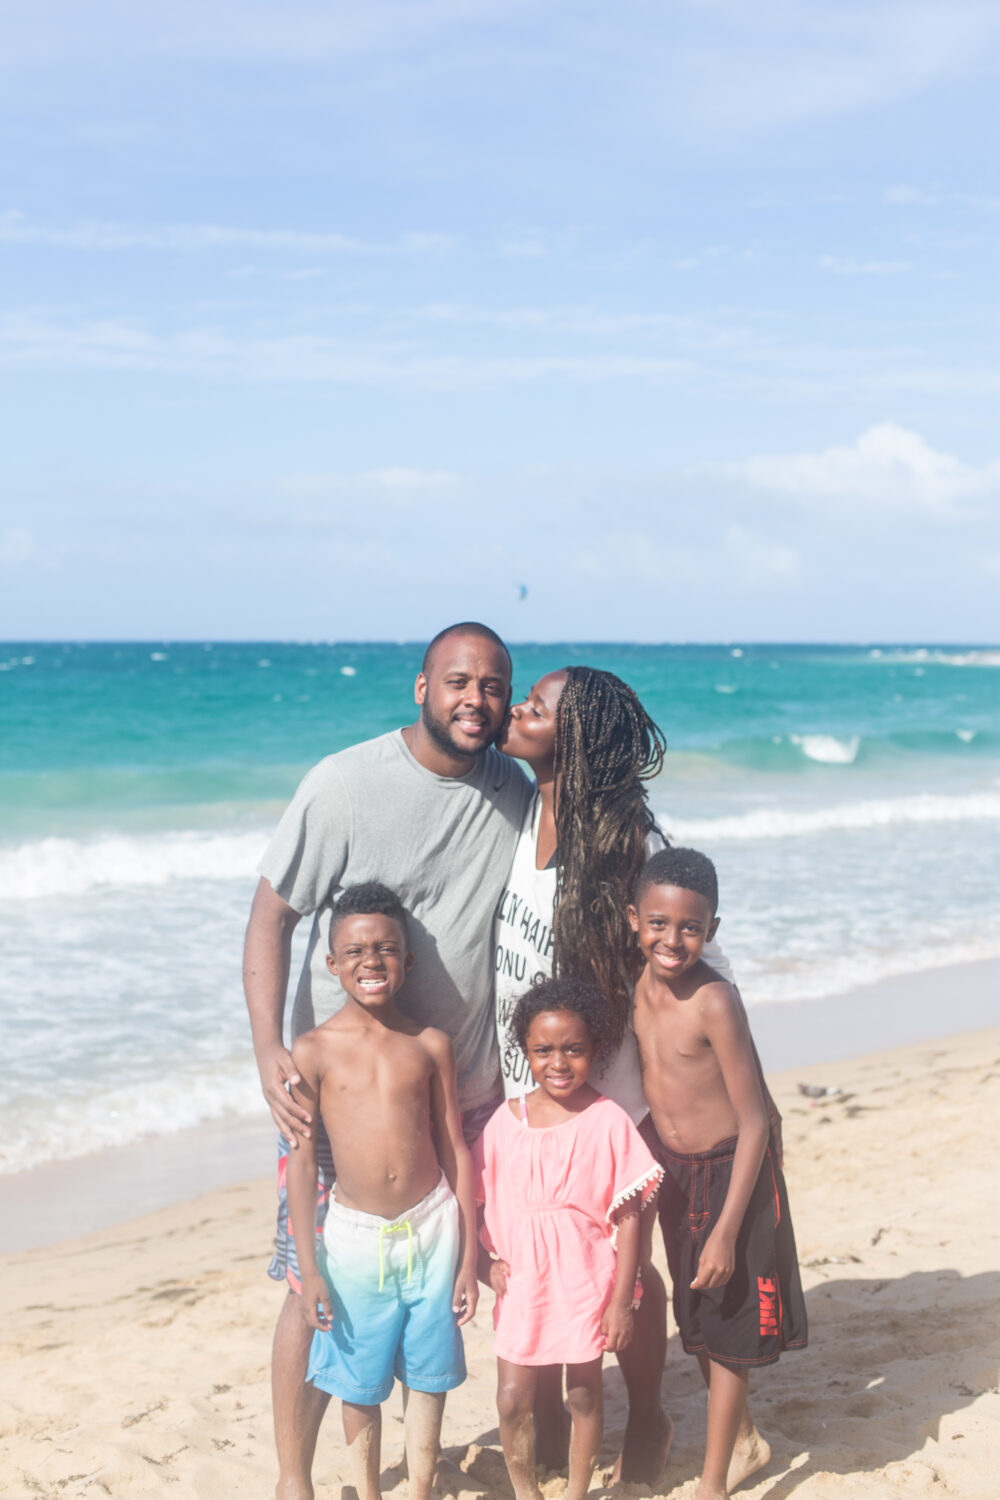 Our Family Trip to Puerto Rico